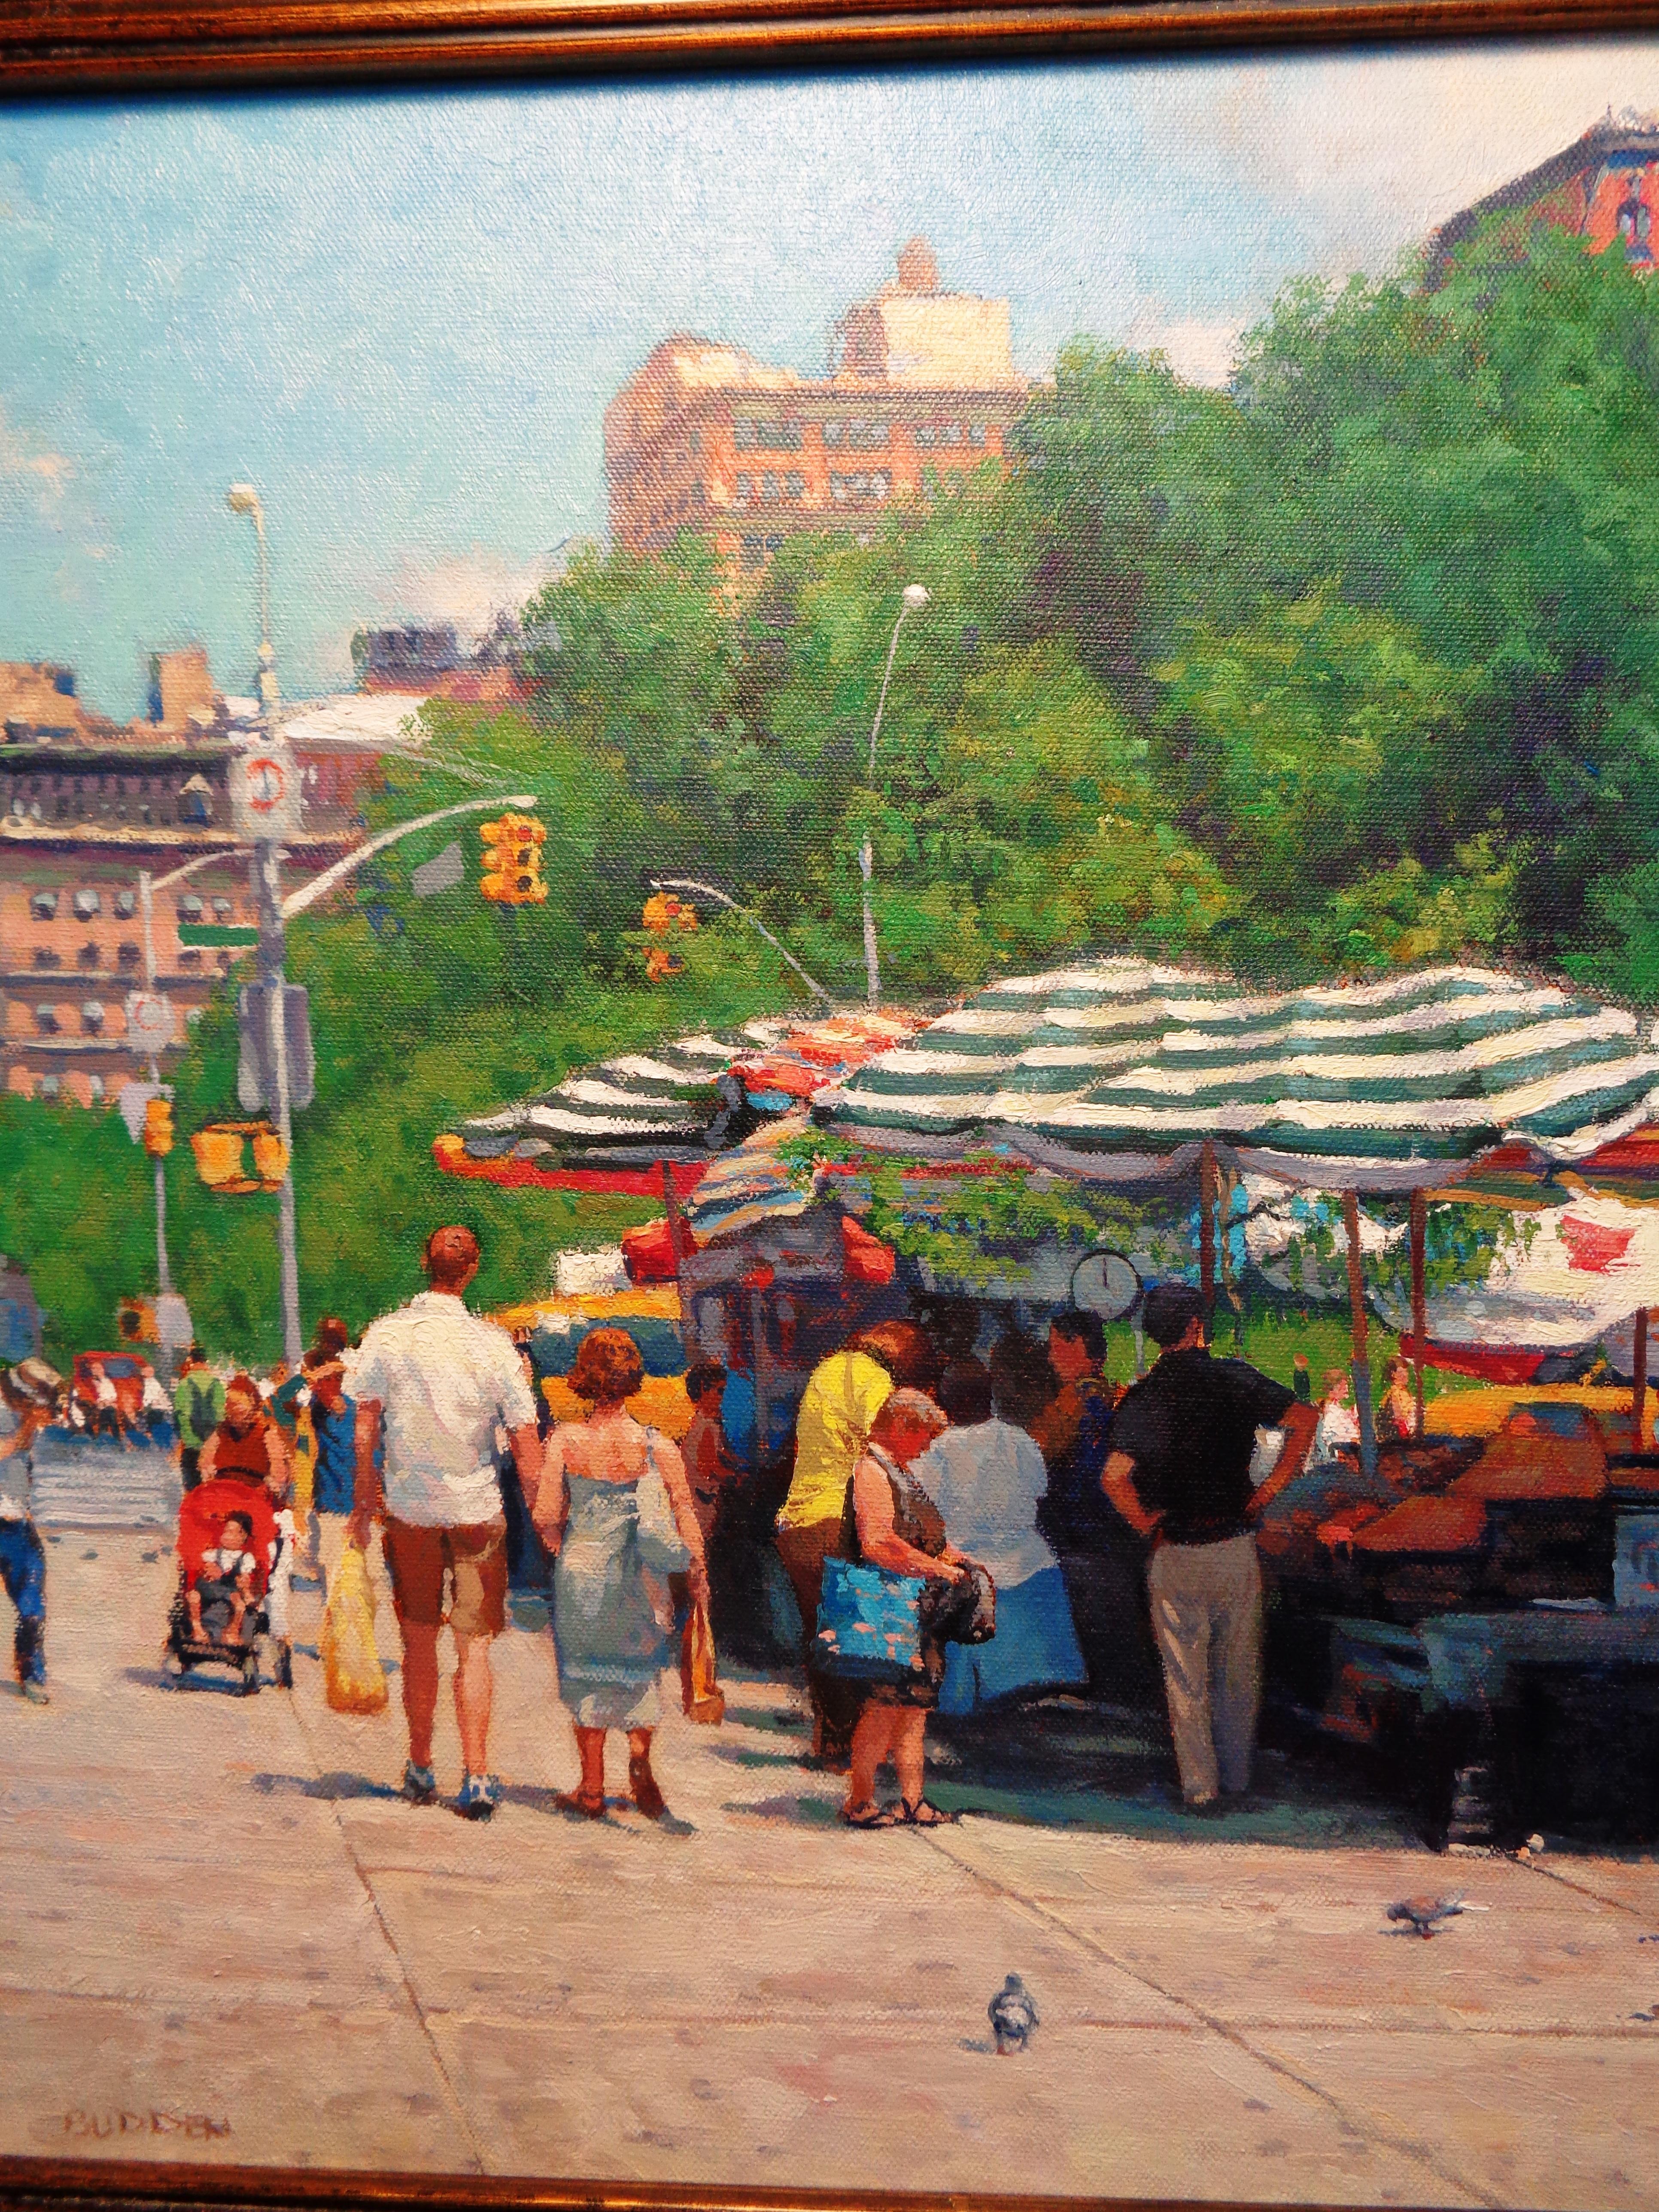  New York City Landscape Oil Painting of Union Square by Michael Budden 2